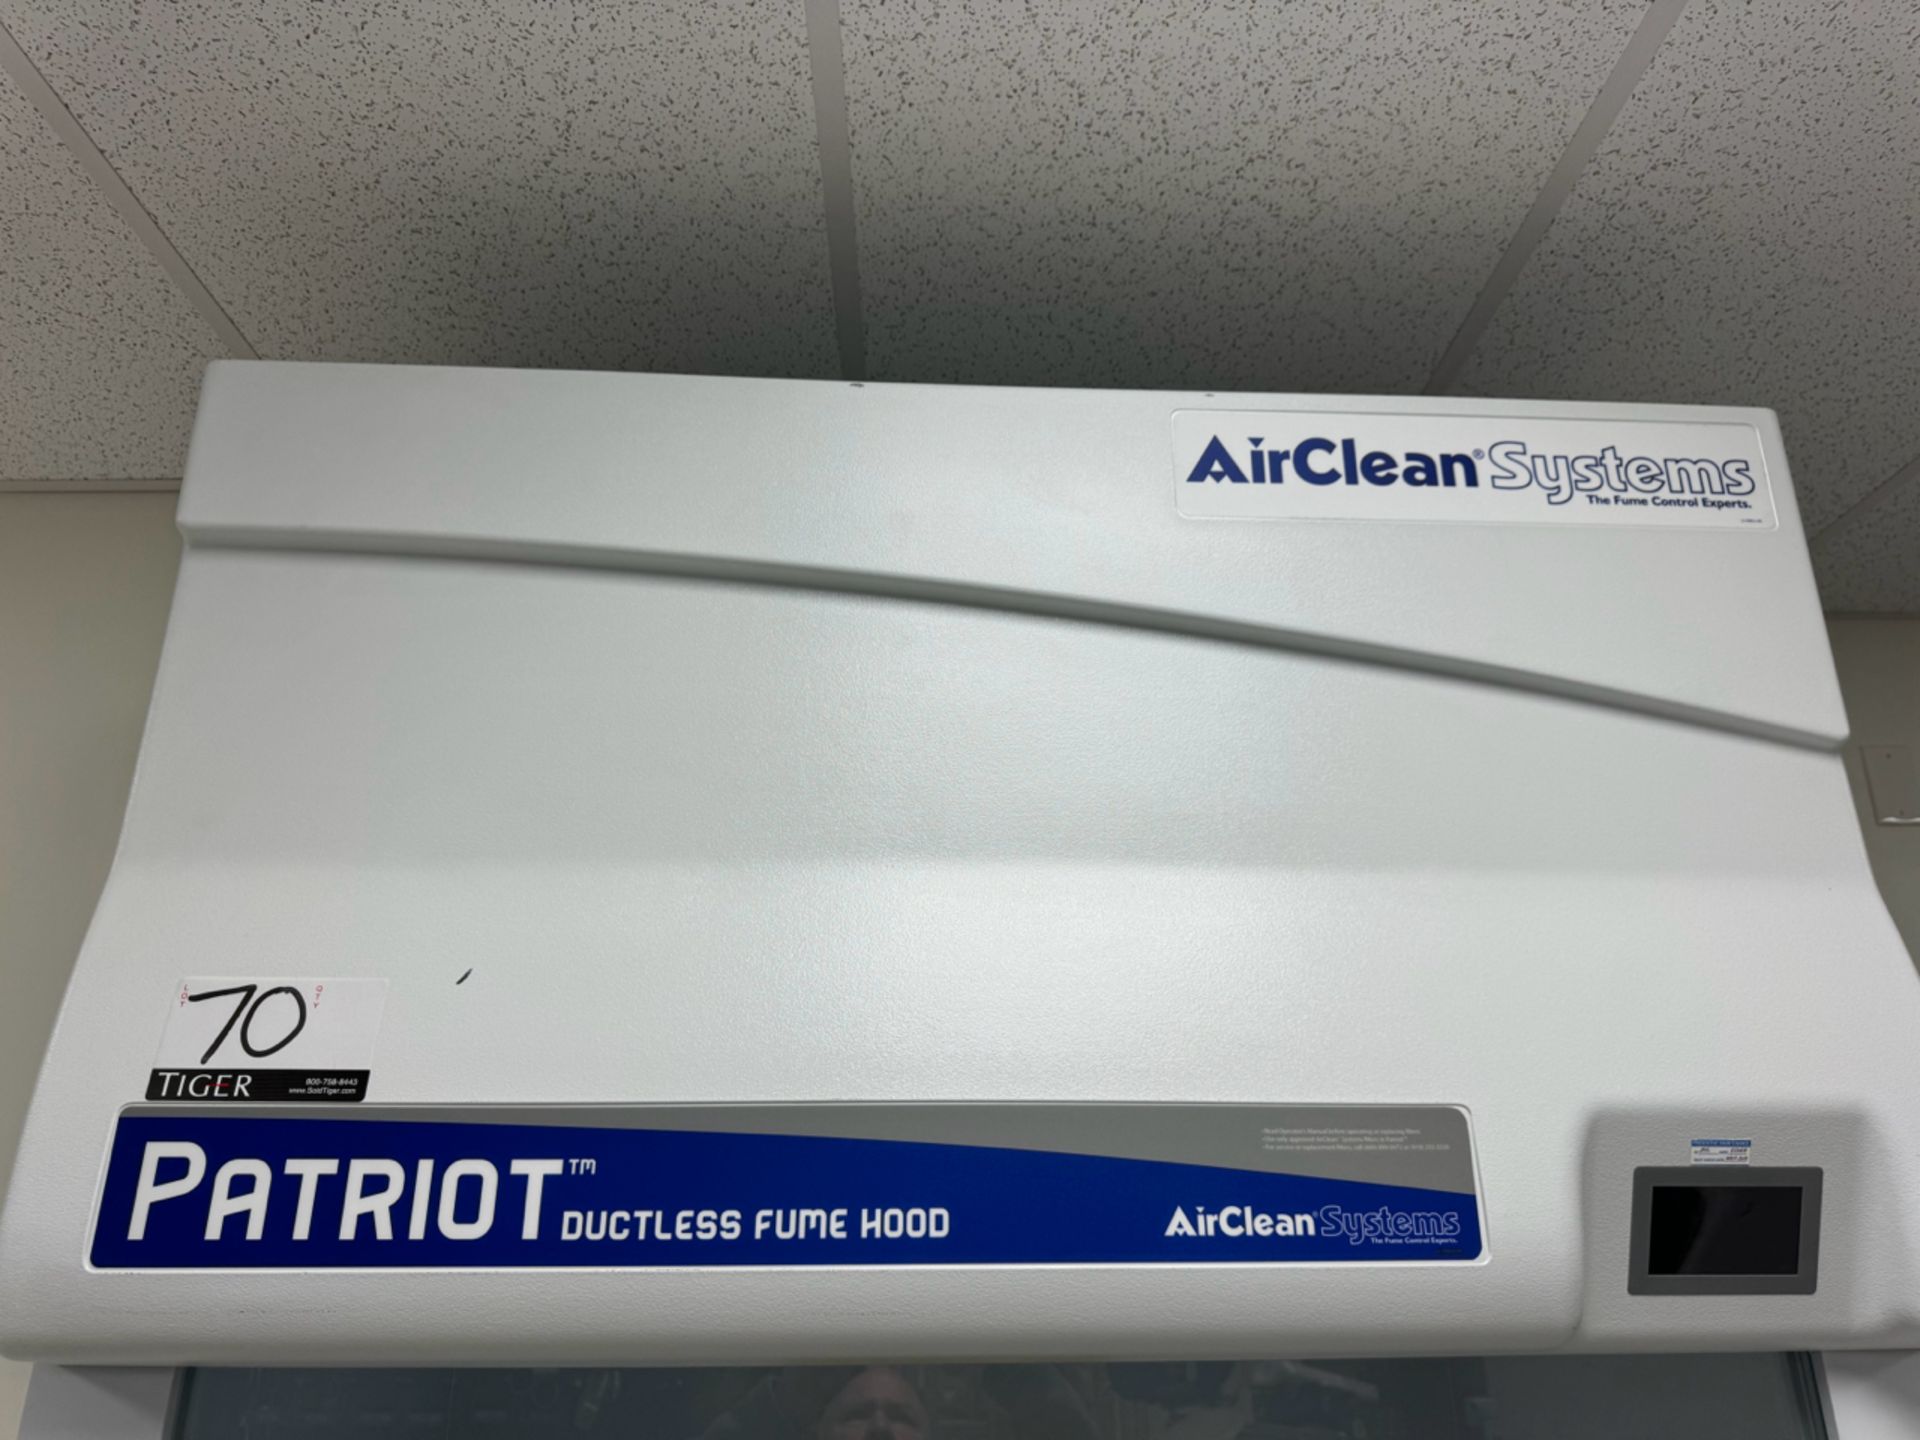 Patriot Ductless Fume Hood - Image 2 of 5